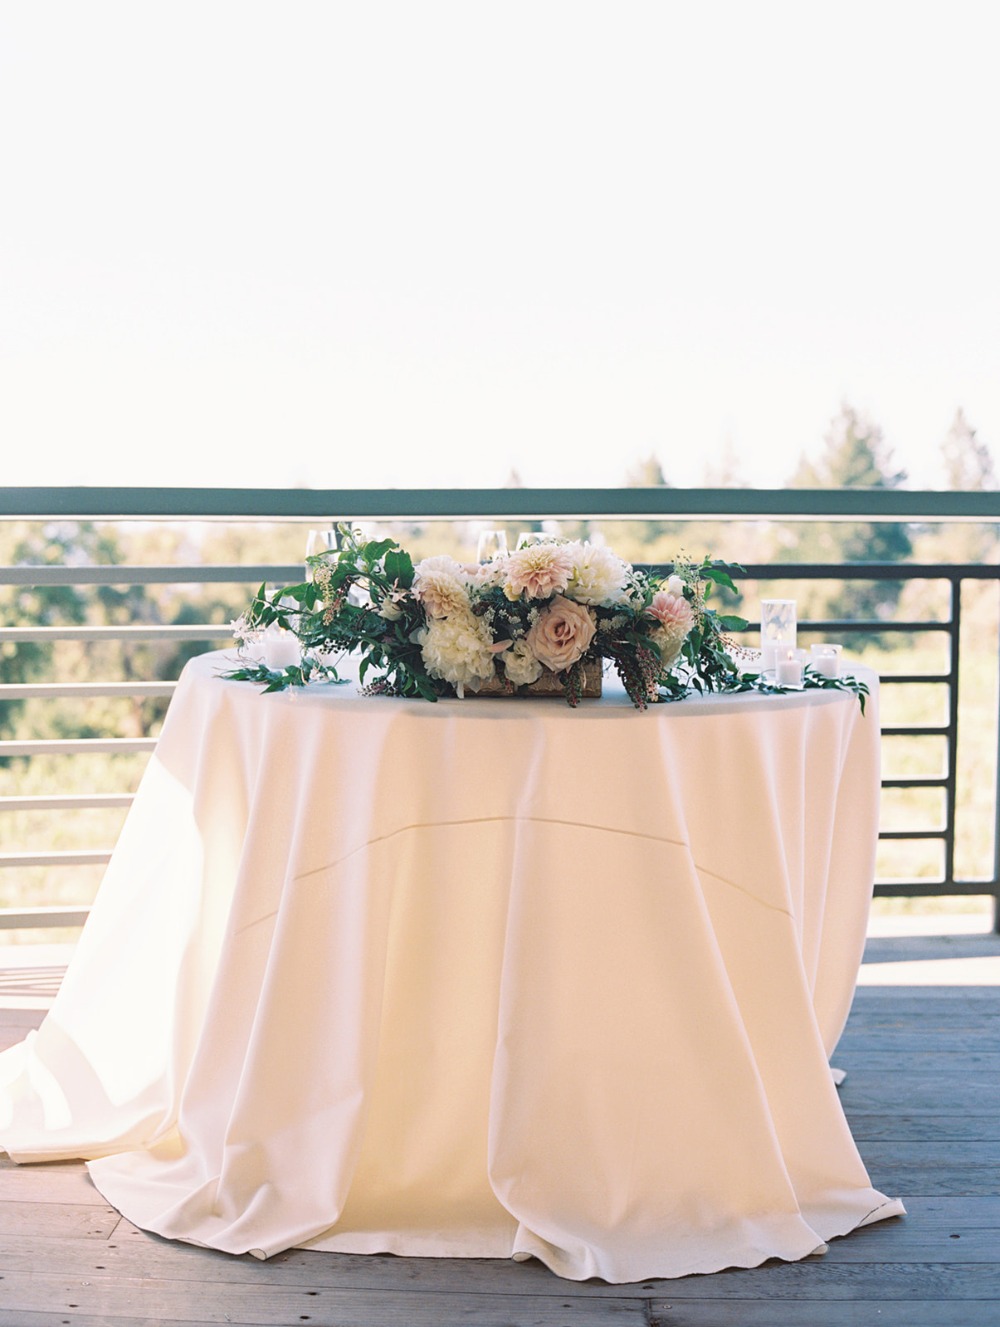 sweetheart table at winery wedding